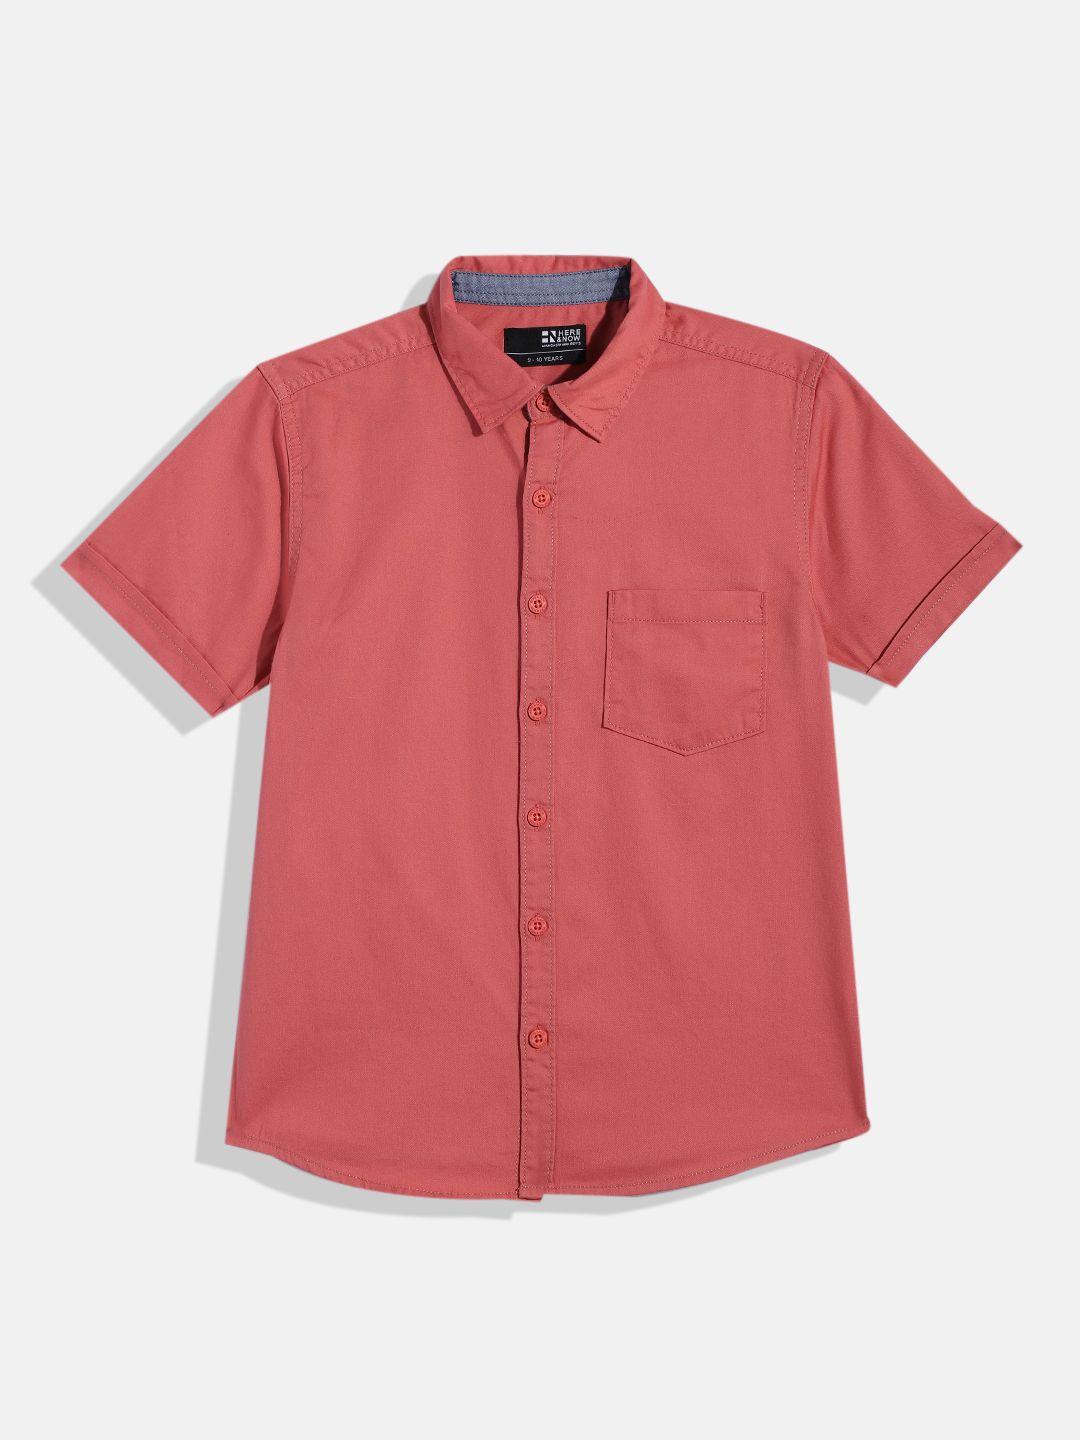 here&now boys cotton casual shirt